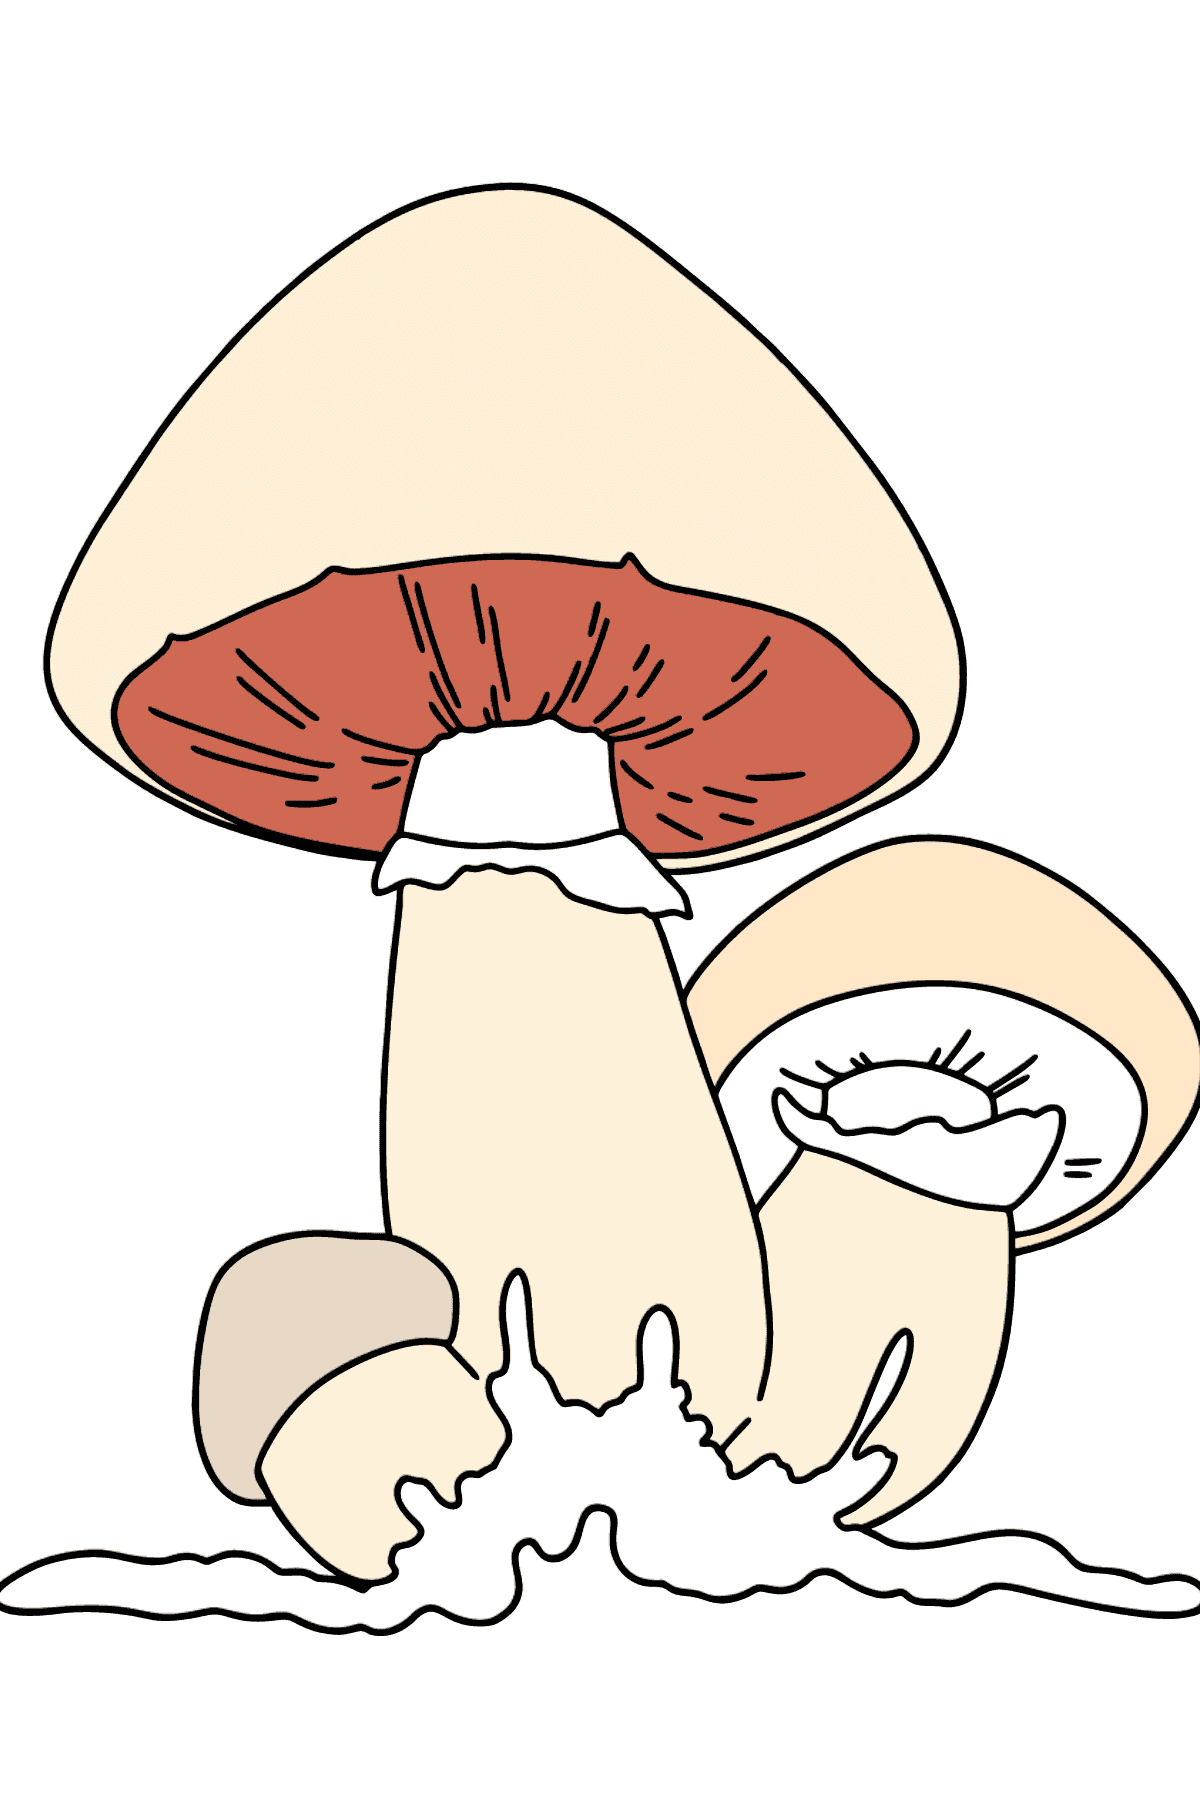 Champignons coloring page - Coloring Pages for Kids